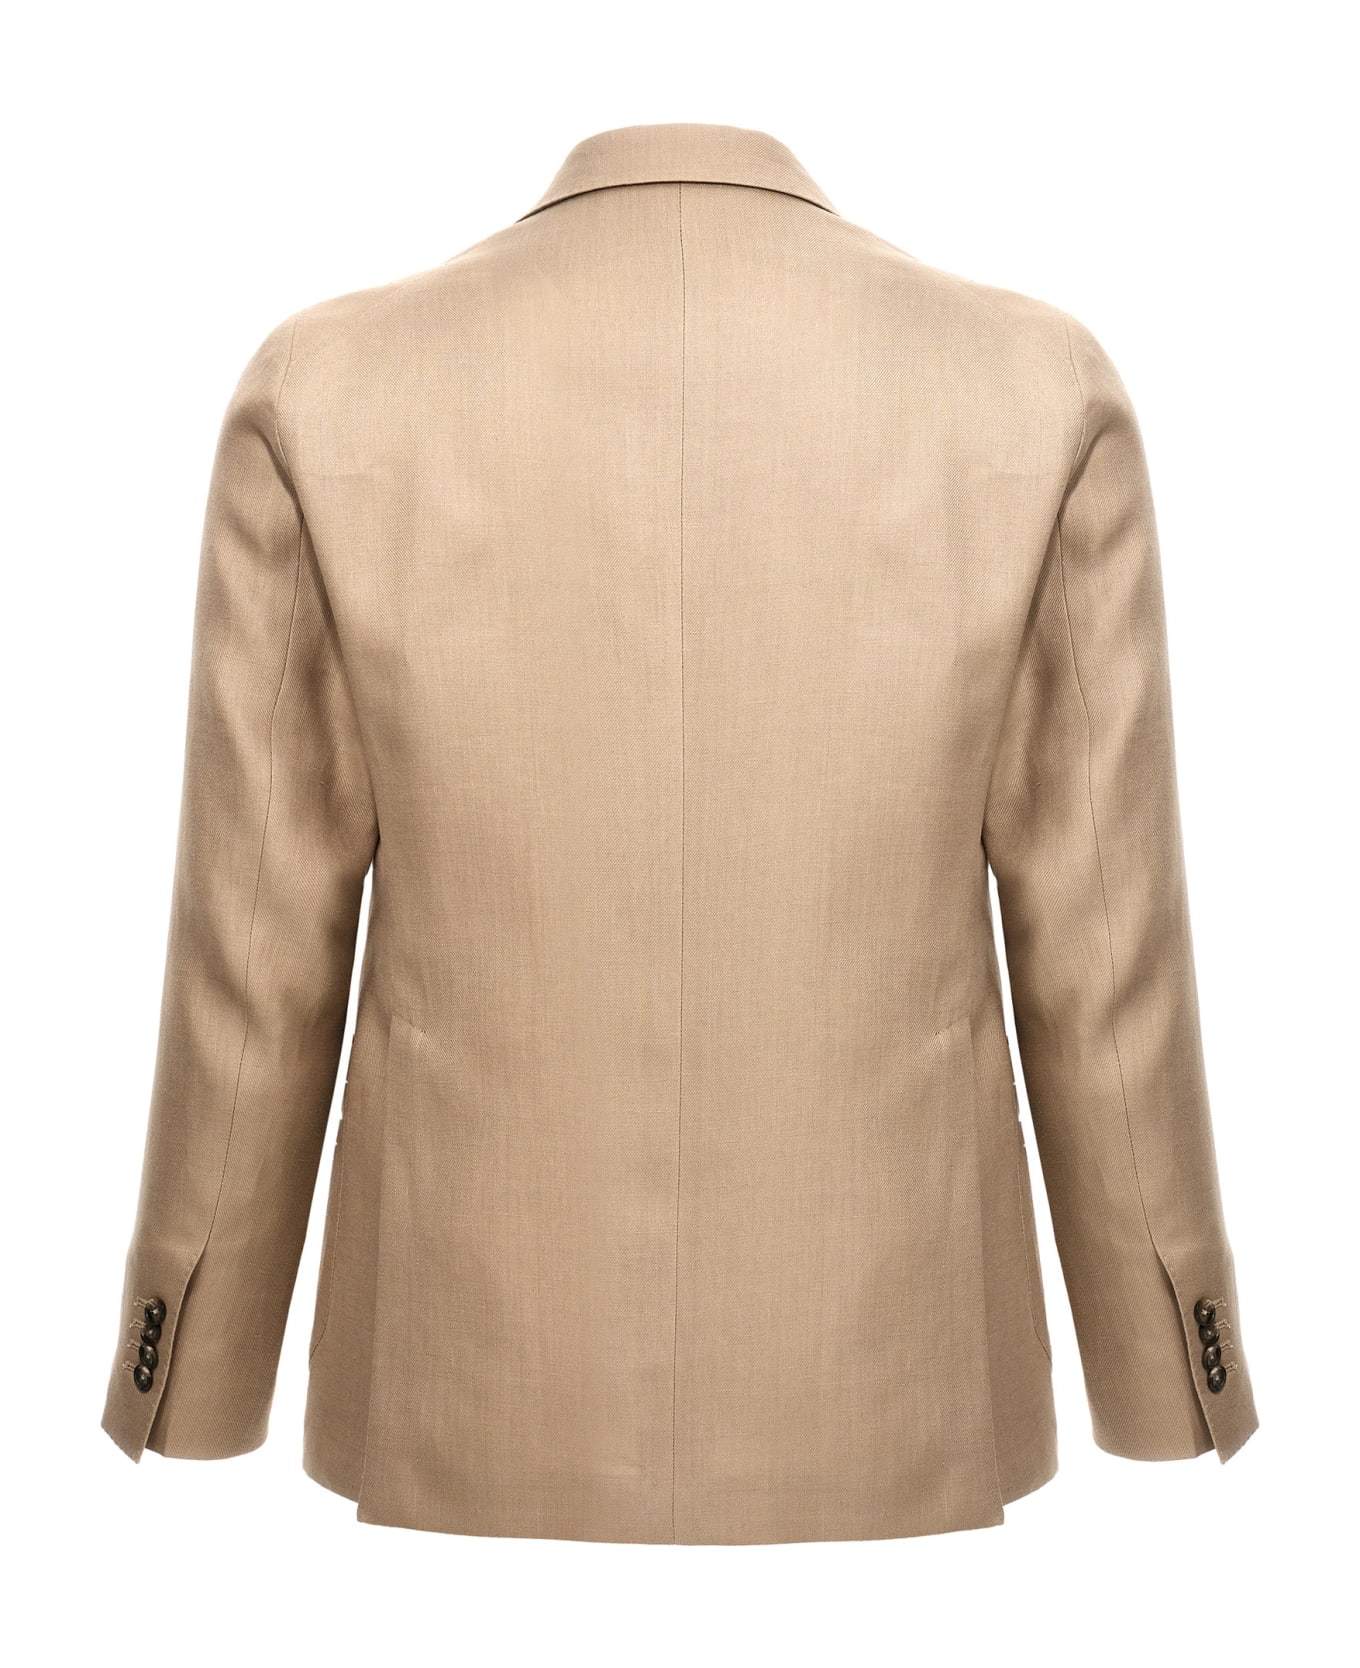 Tagliatore Double-breasted Linen Suit - Beige スーツ